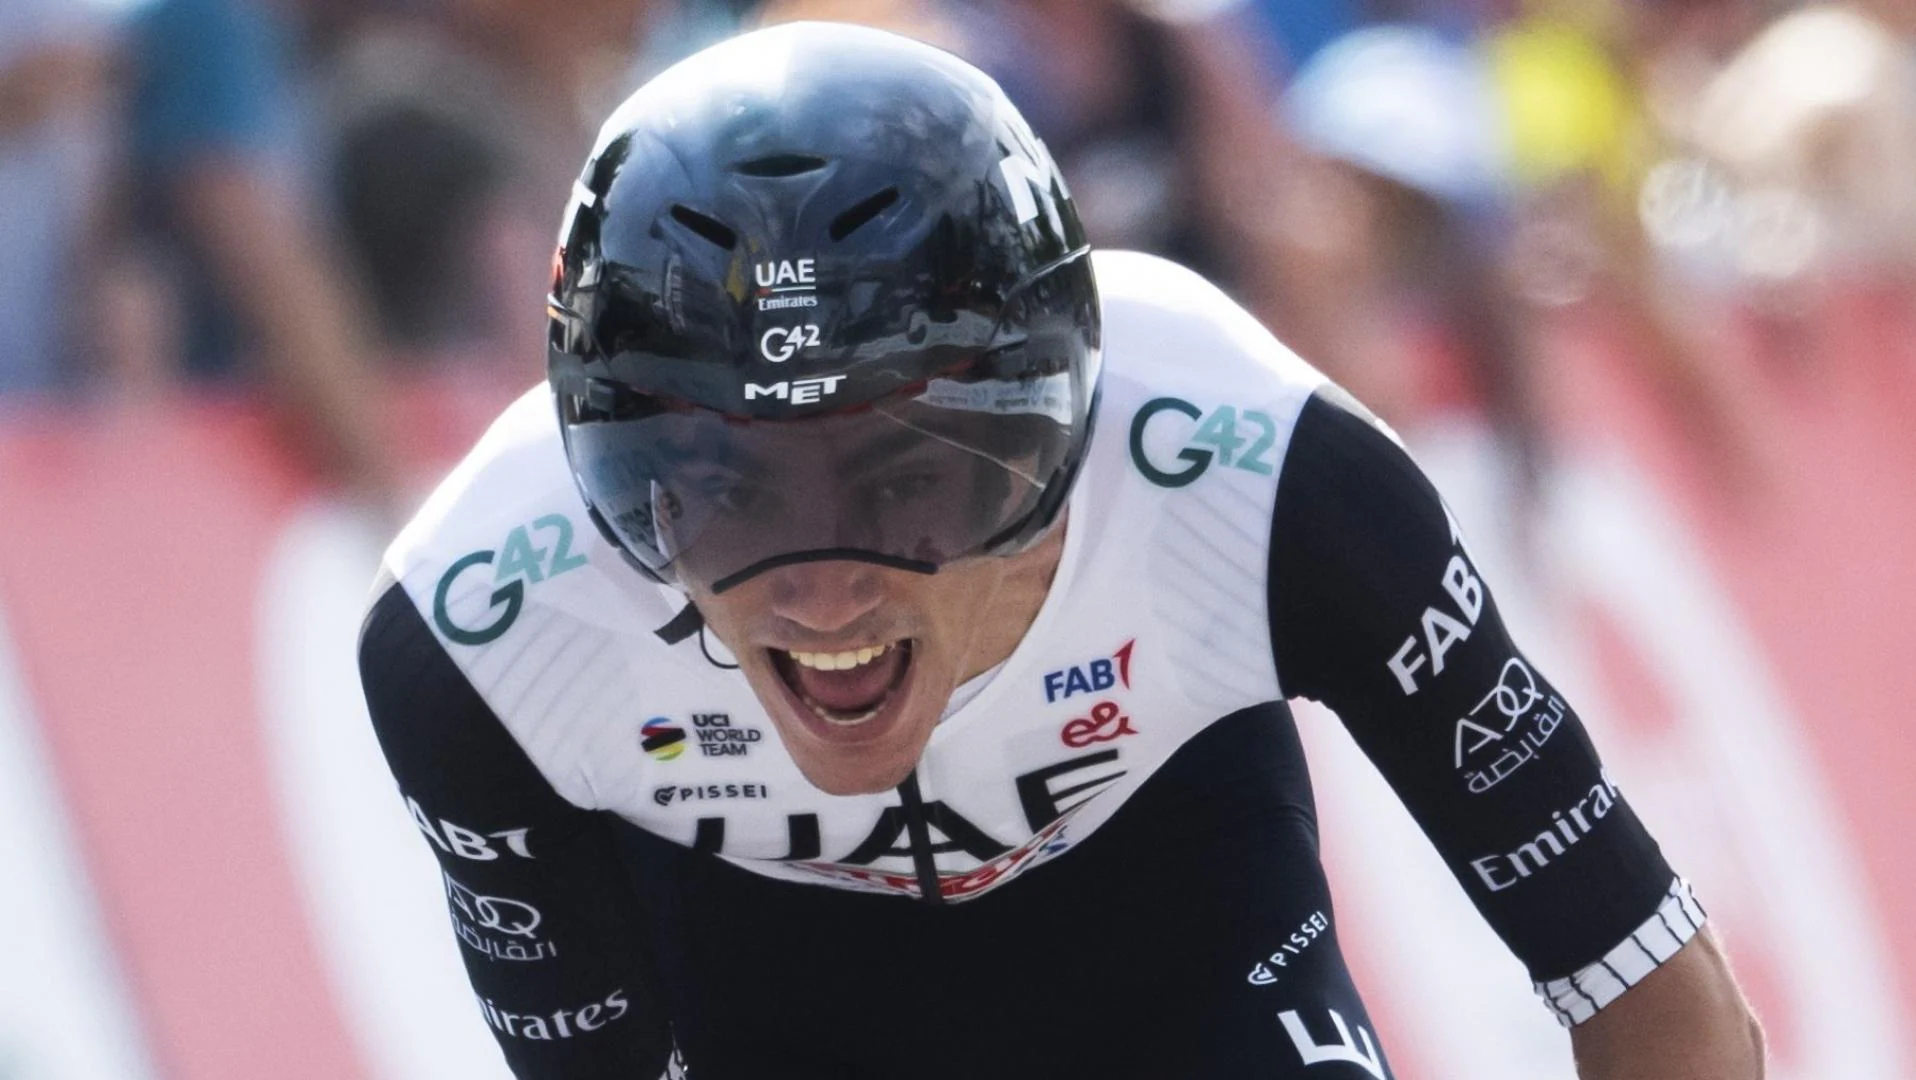 Juan Ayuso prevails over Remco Evenepoel in the time trial but he has nine seconds left to win the Tour of Switzerland